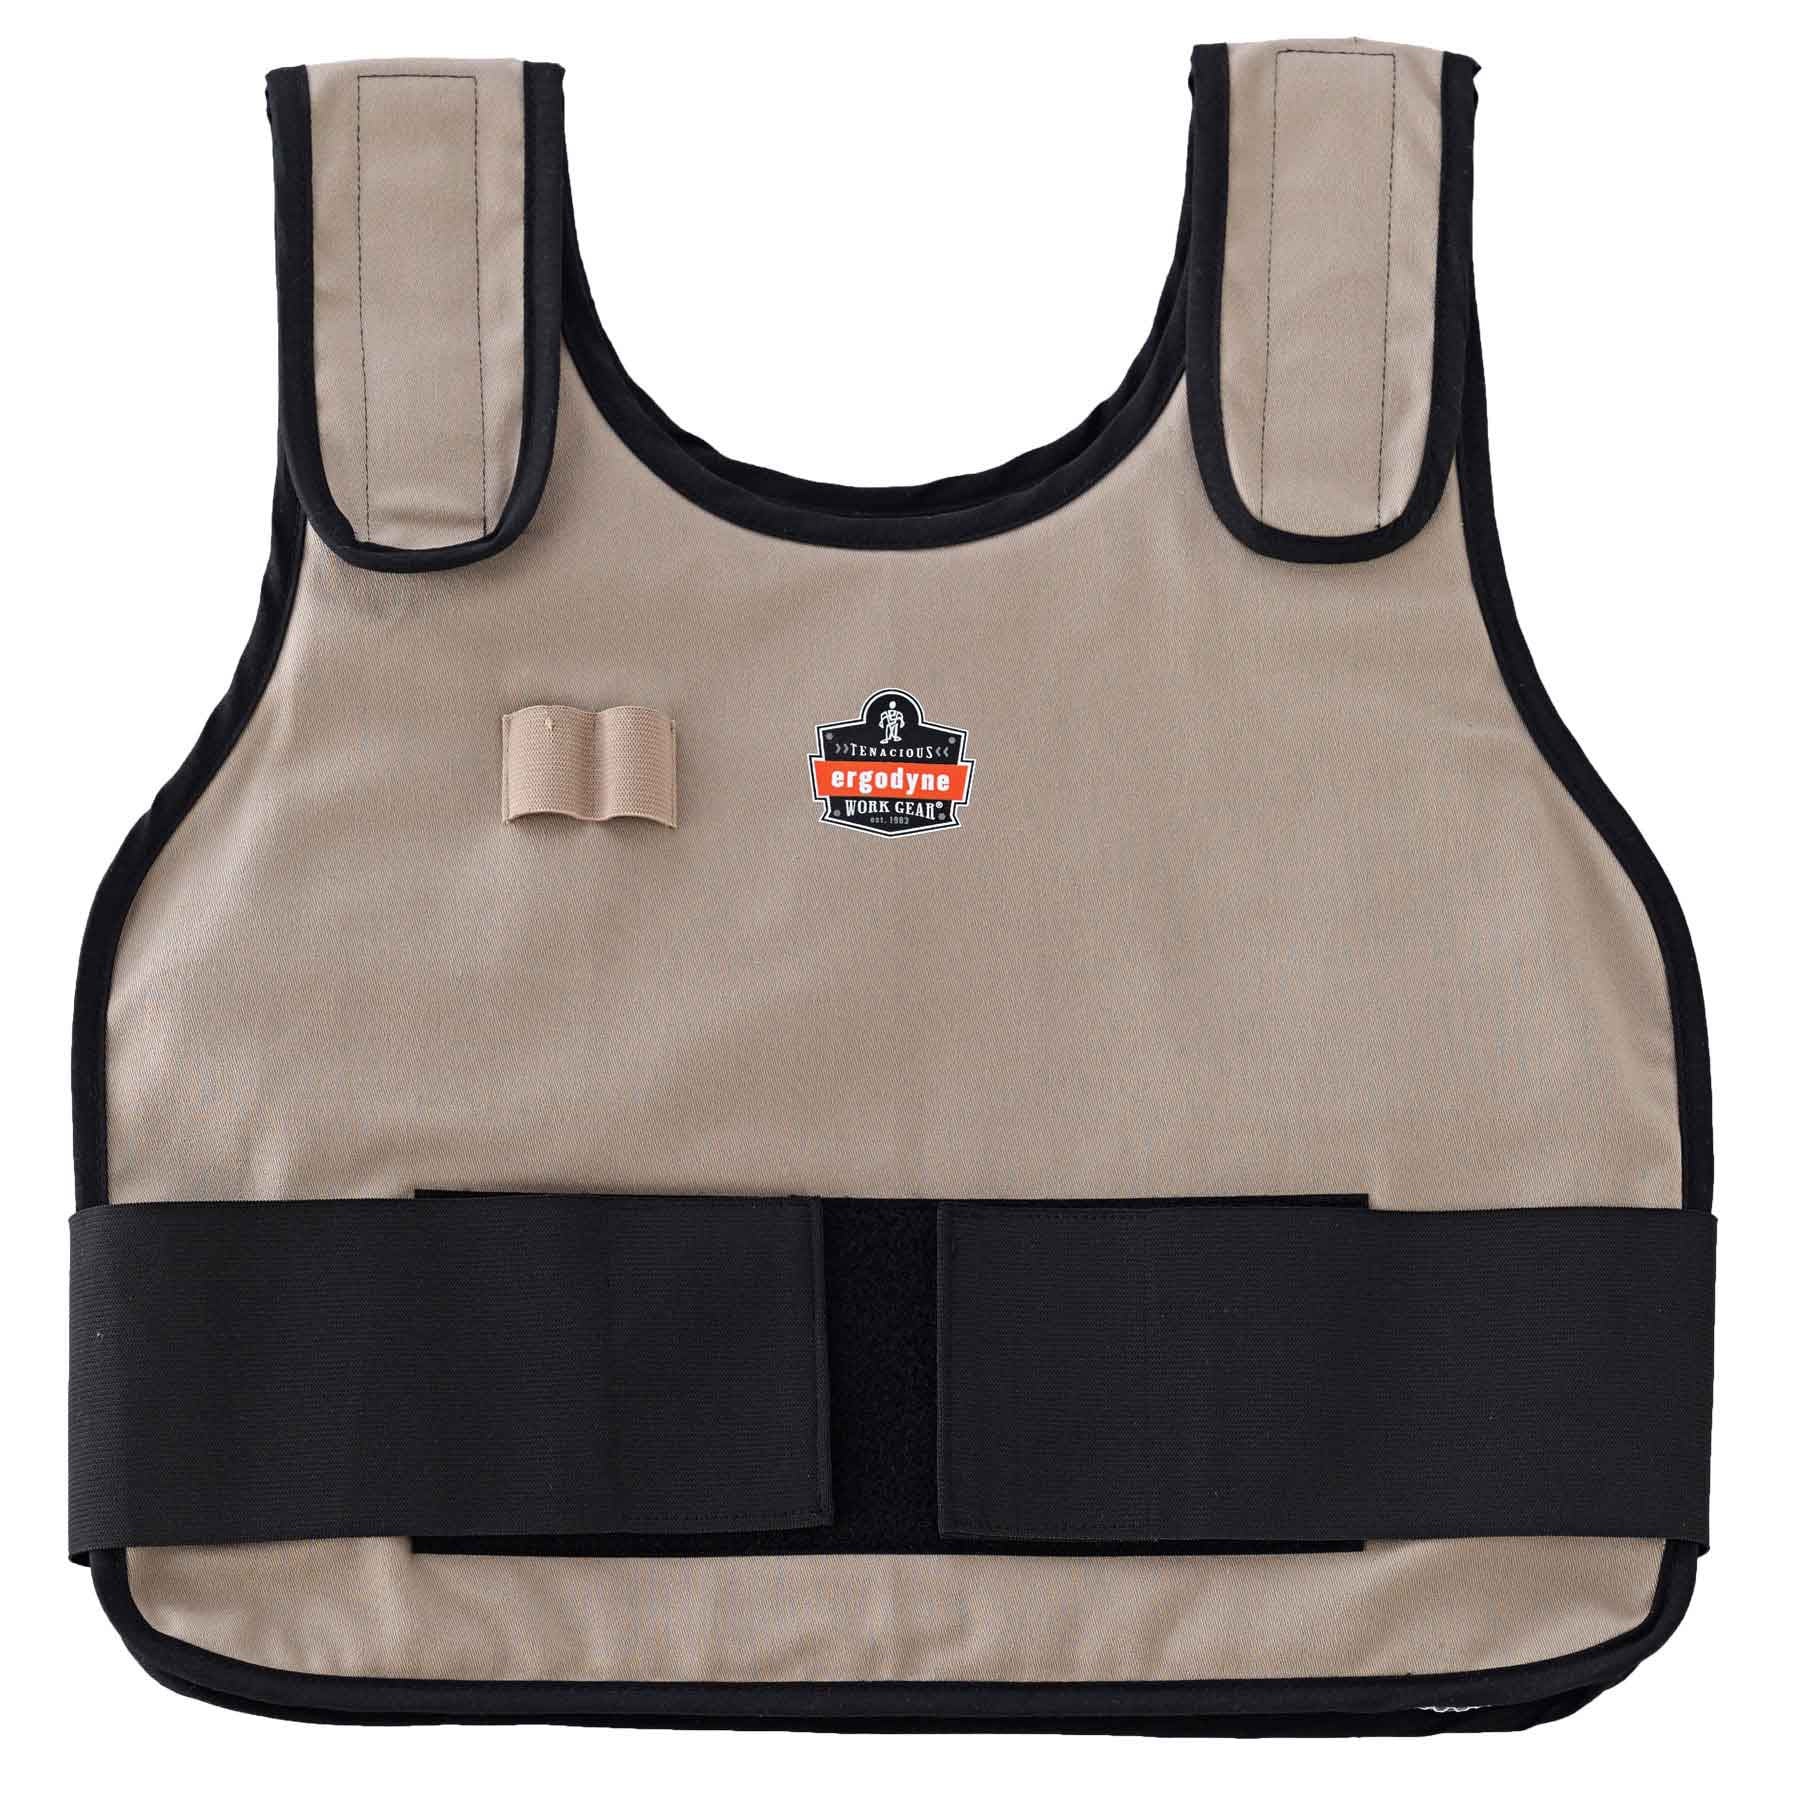 Ergodyne-Chill-Its 6230 Phase Change Standard Cooling Vest w/packs-eSafety Supplies, Inc